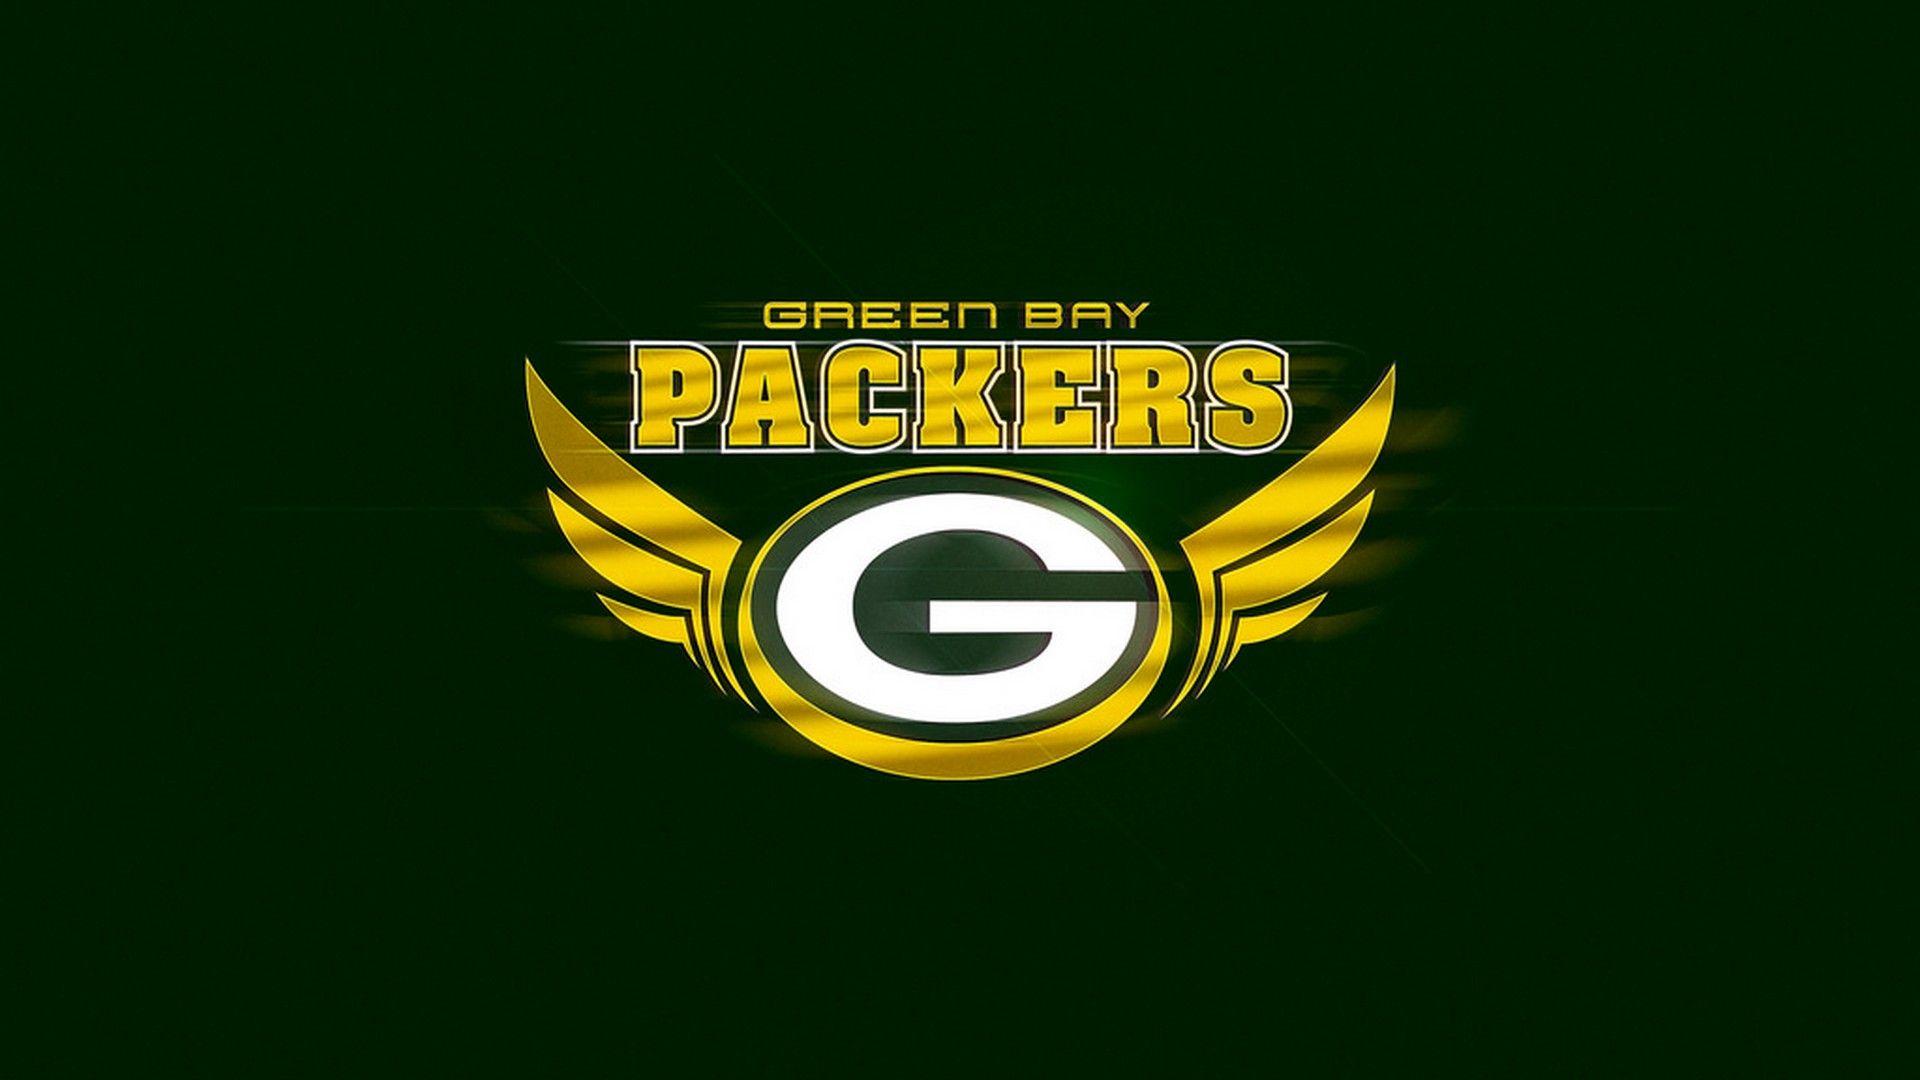 HD Green Bay Packers Background. Green bay packers logo